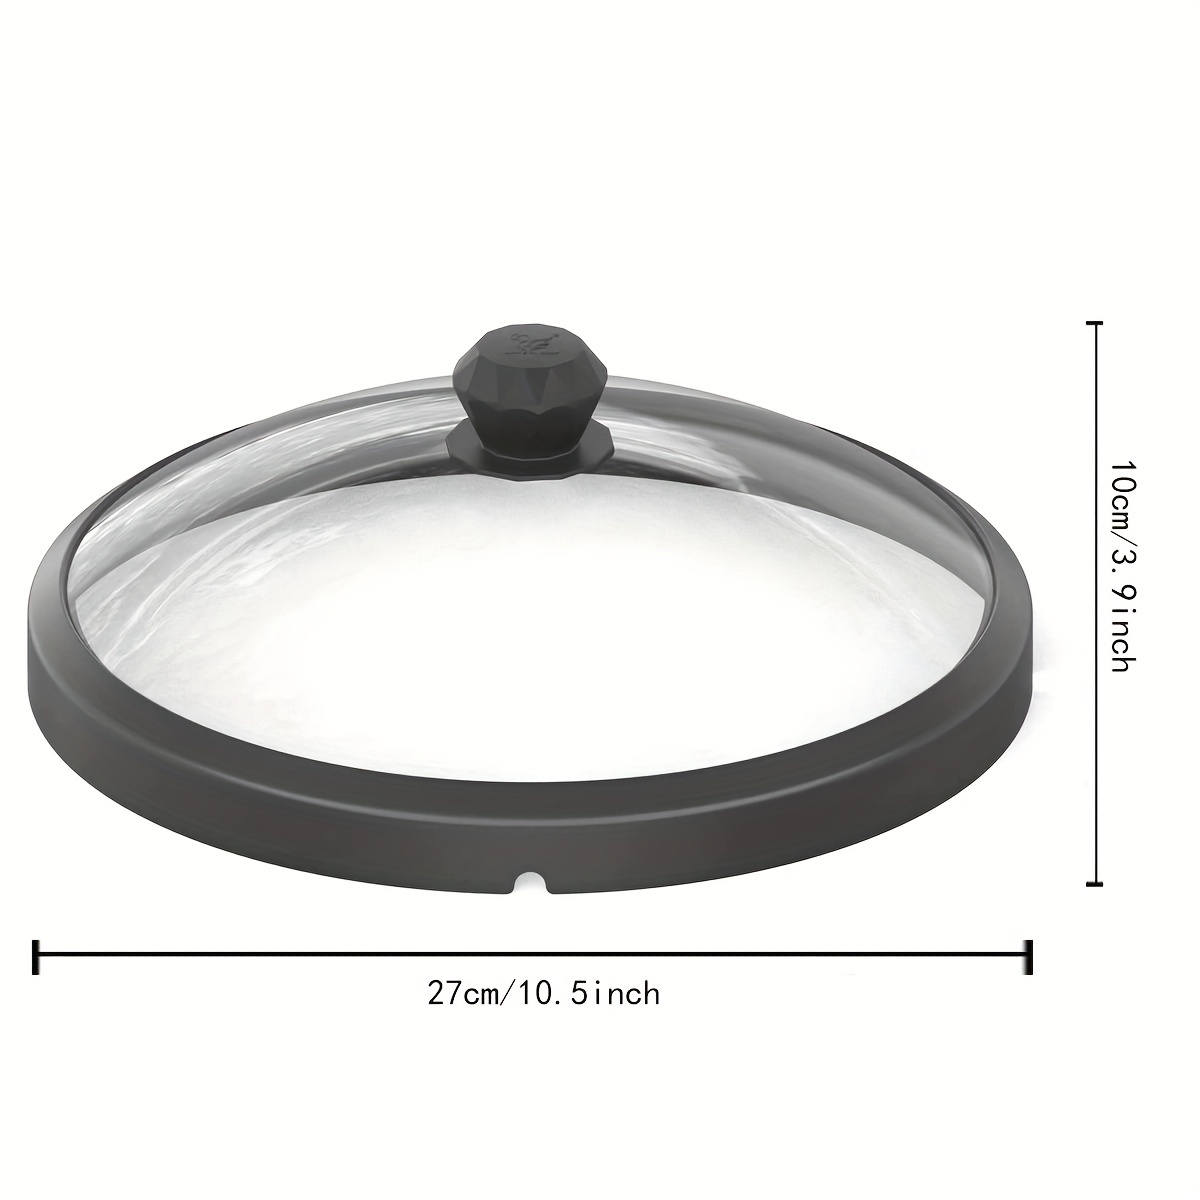  Microwave Glass Plate Cover Lid - Vented and